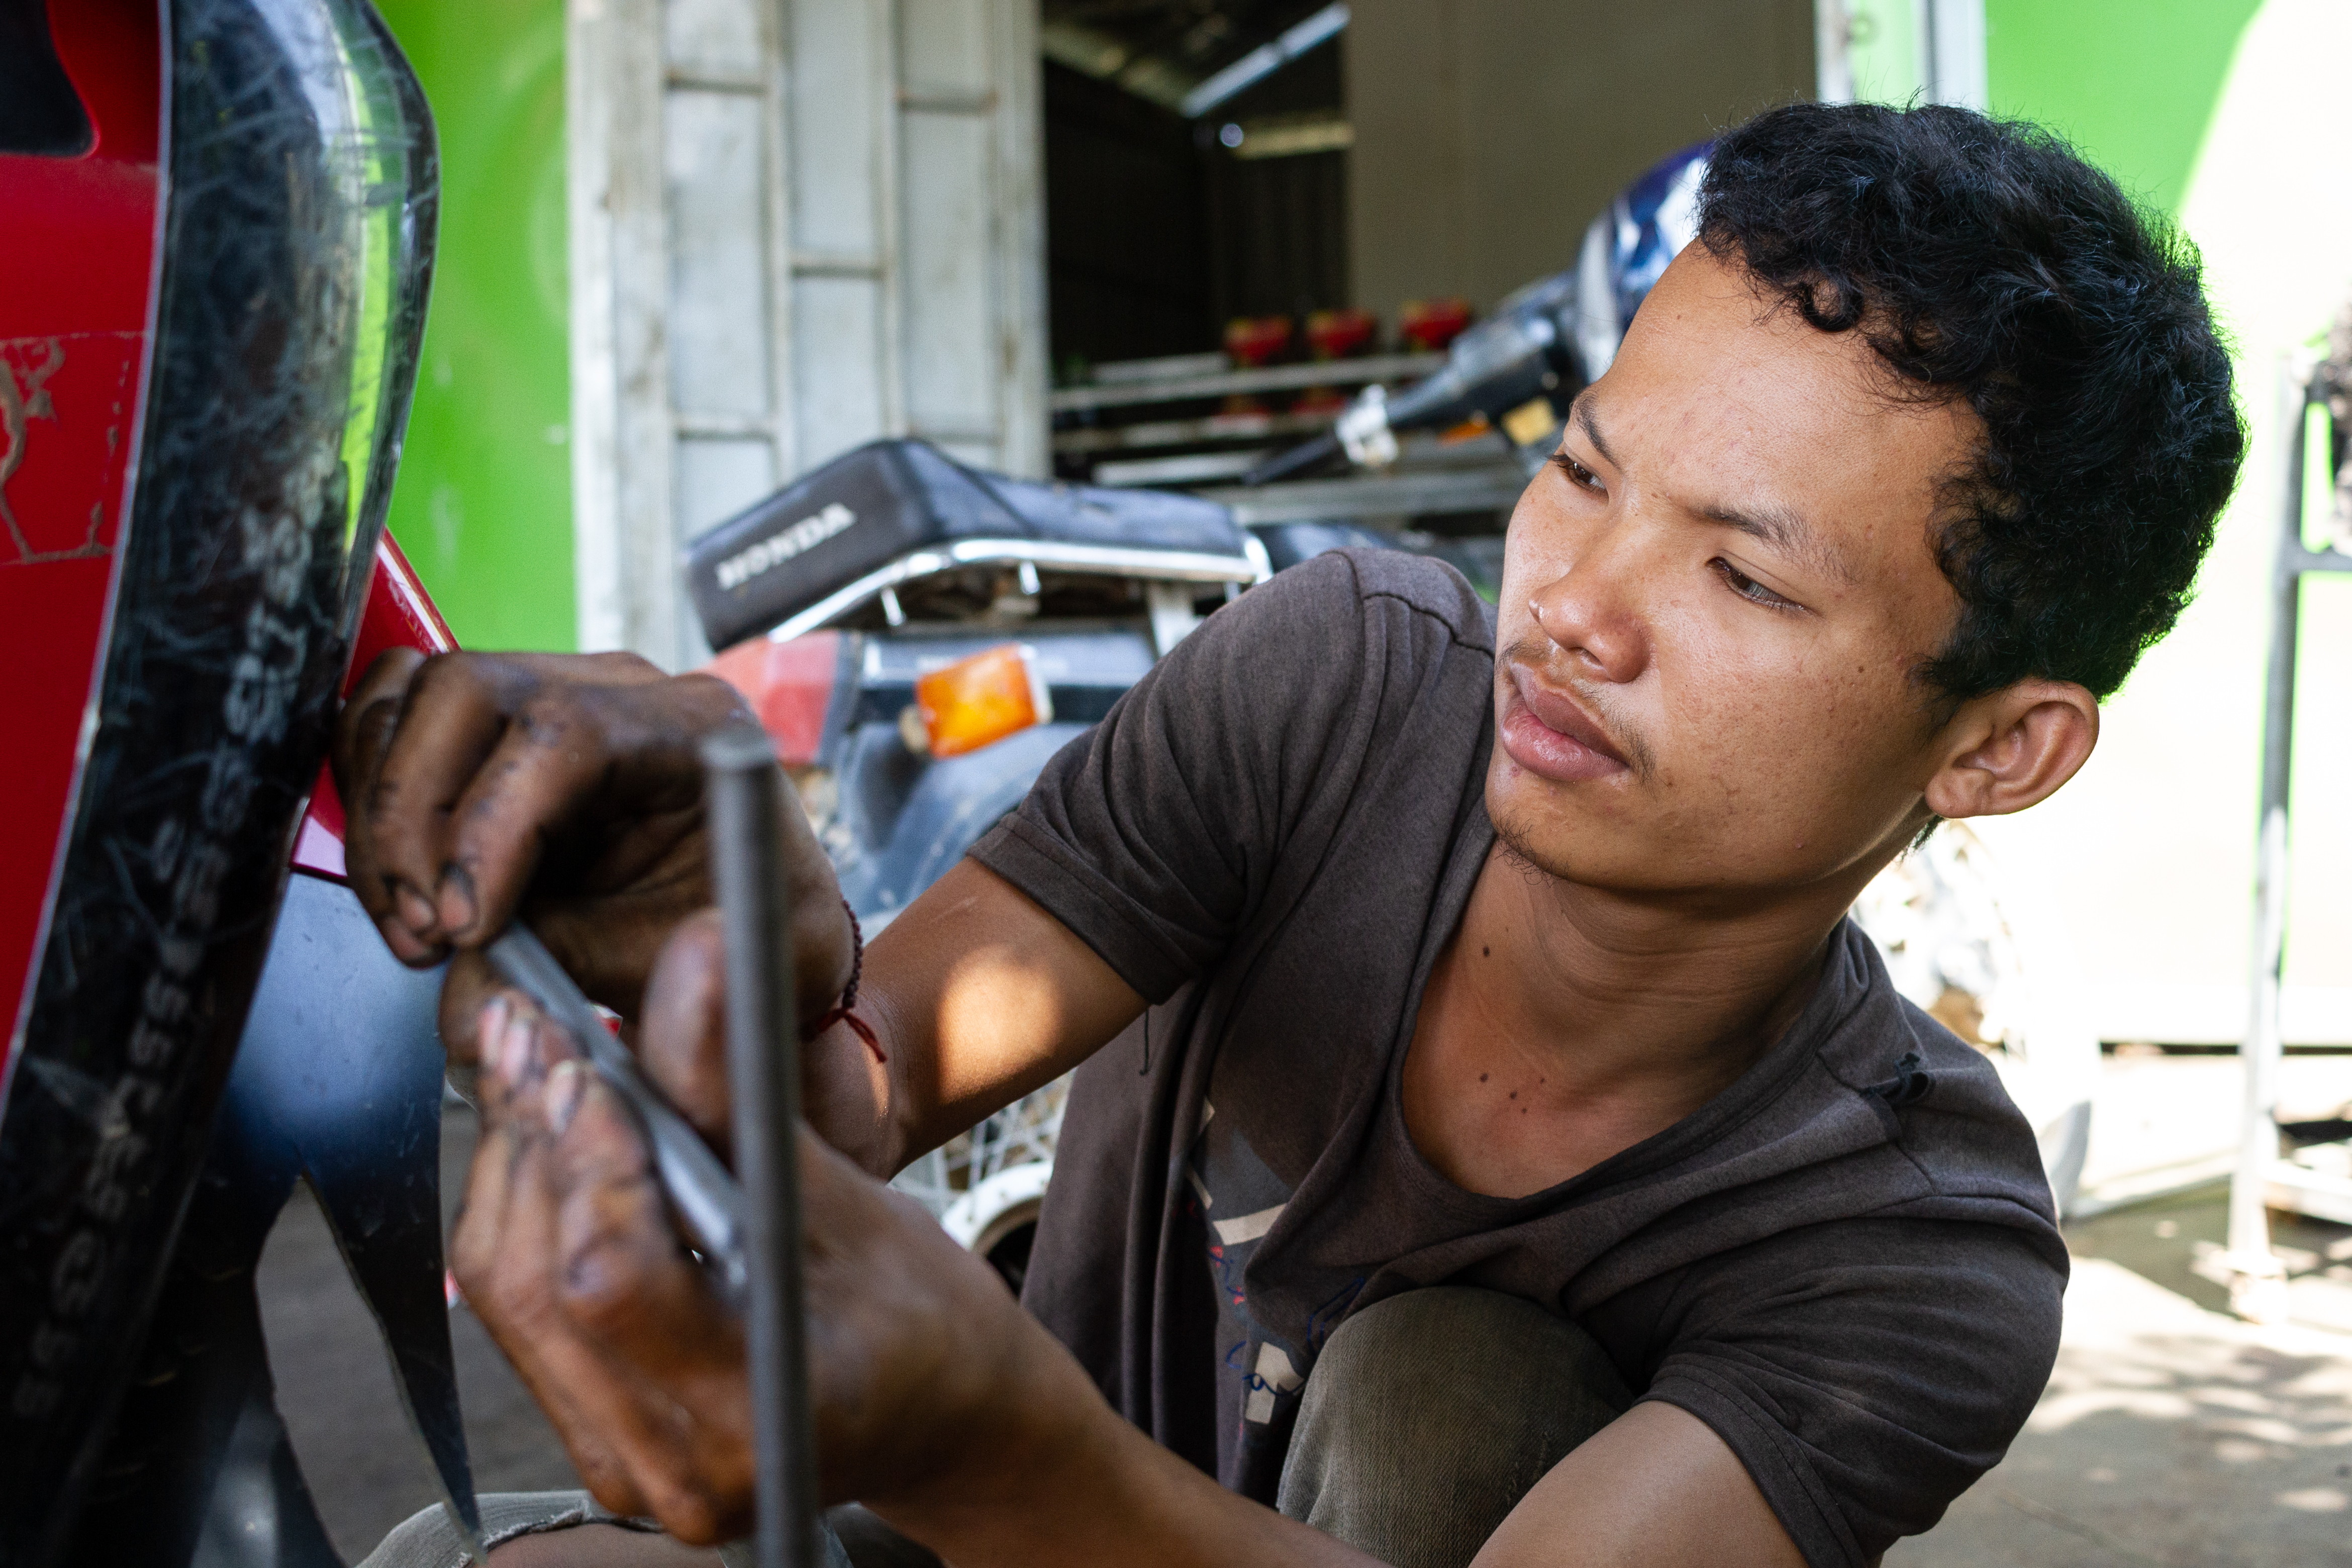 Hun Rortha works on a motorbike's suspension at his motorbike and engine repair shop in Ba Phnom district, Cambodia. Hun Rortha is a graduate from MCC partner Organization to Develop Our Villages' (ODOV) vocational training program, and using the skills and knowledge he gained during that training opened his own shop in 2021.